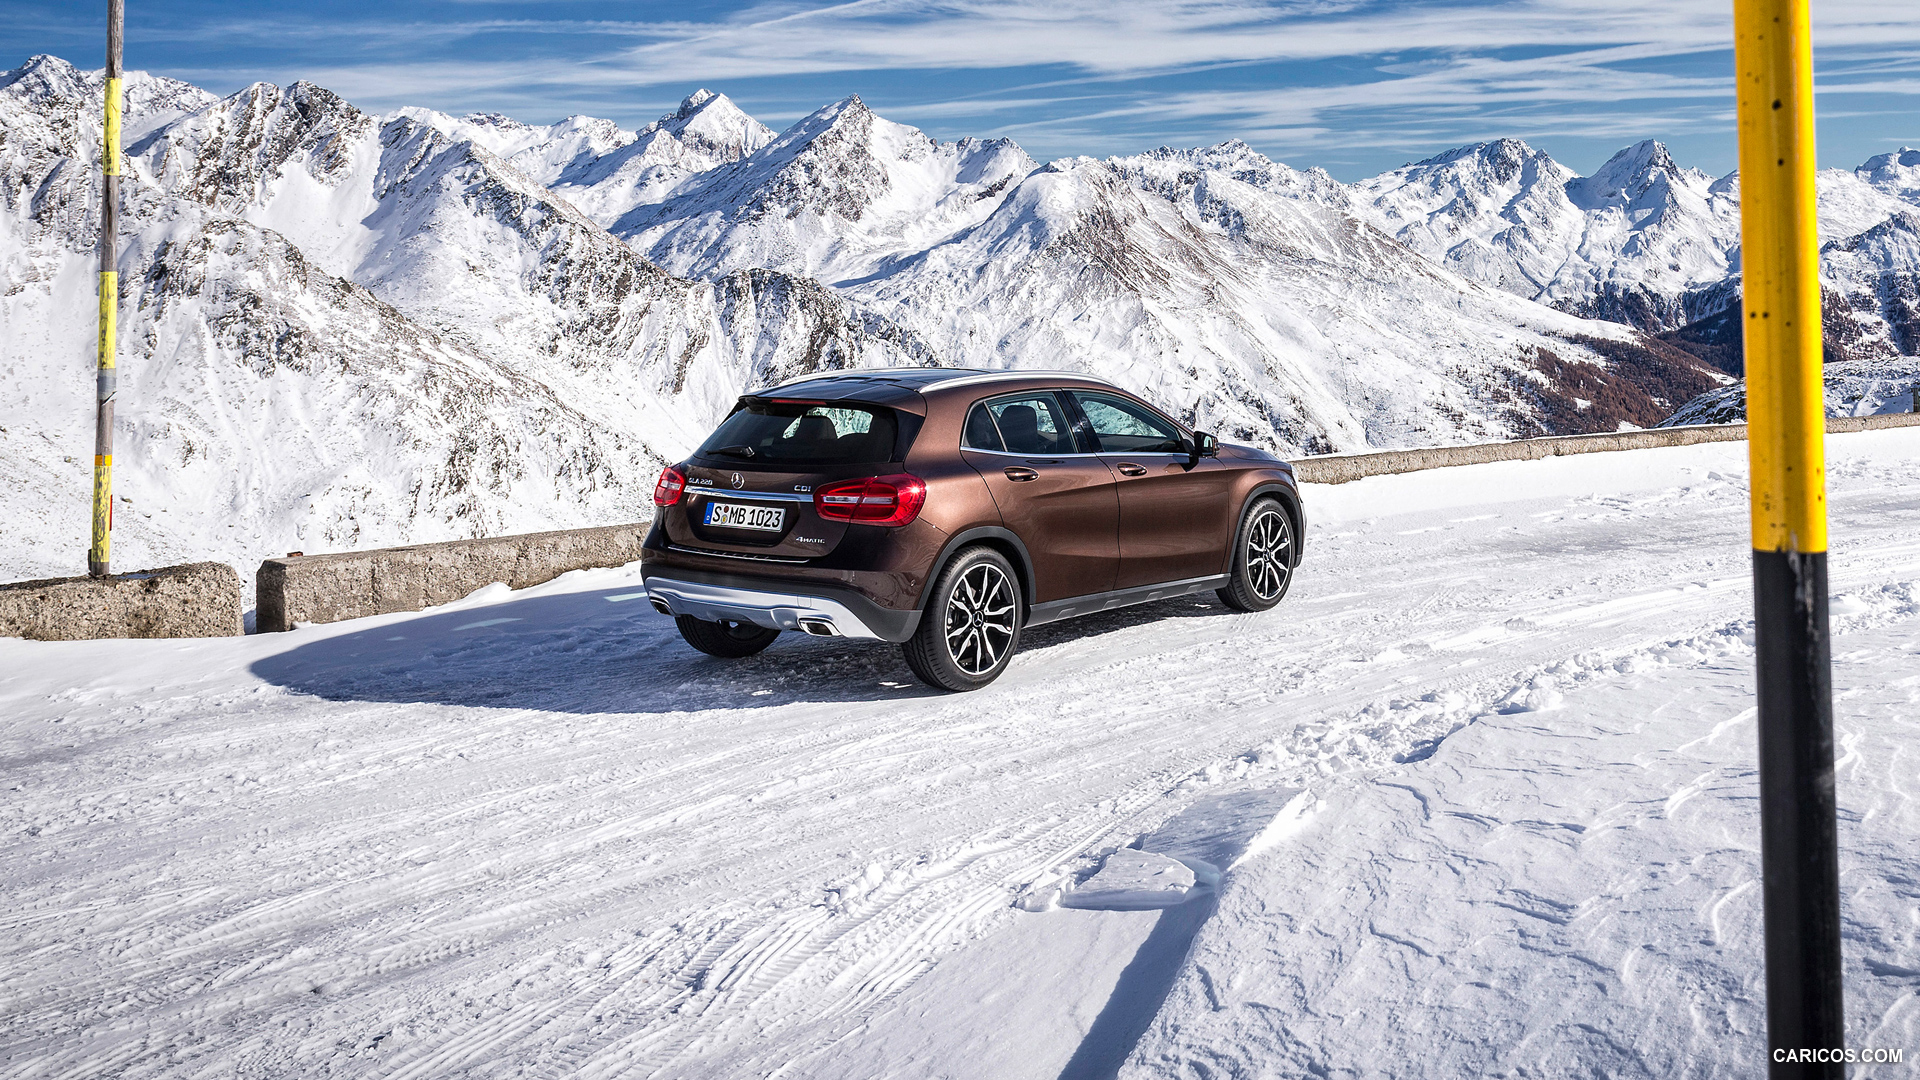 2015 Mercedes-Benz GLA 220 CDI 4MATIC - In Snow - Rear, #63 of 71